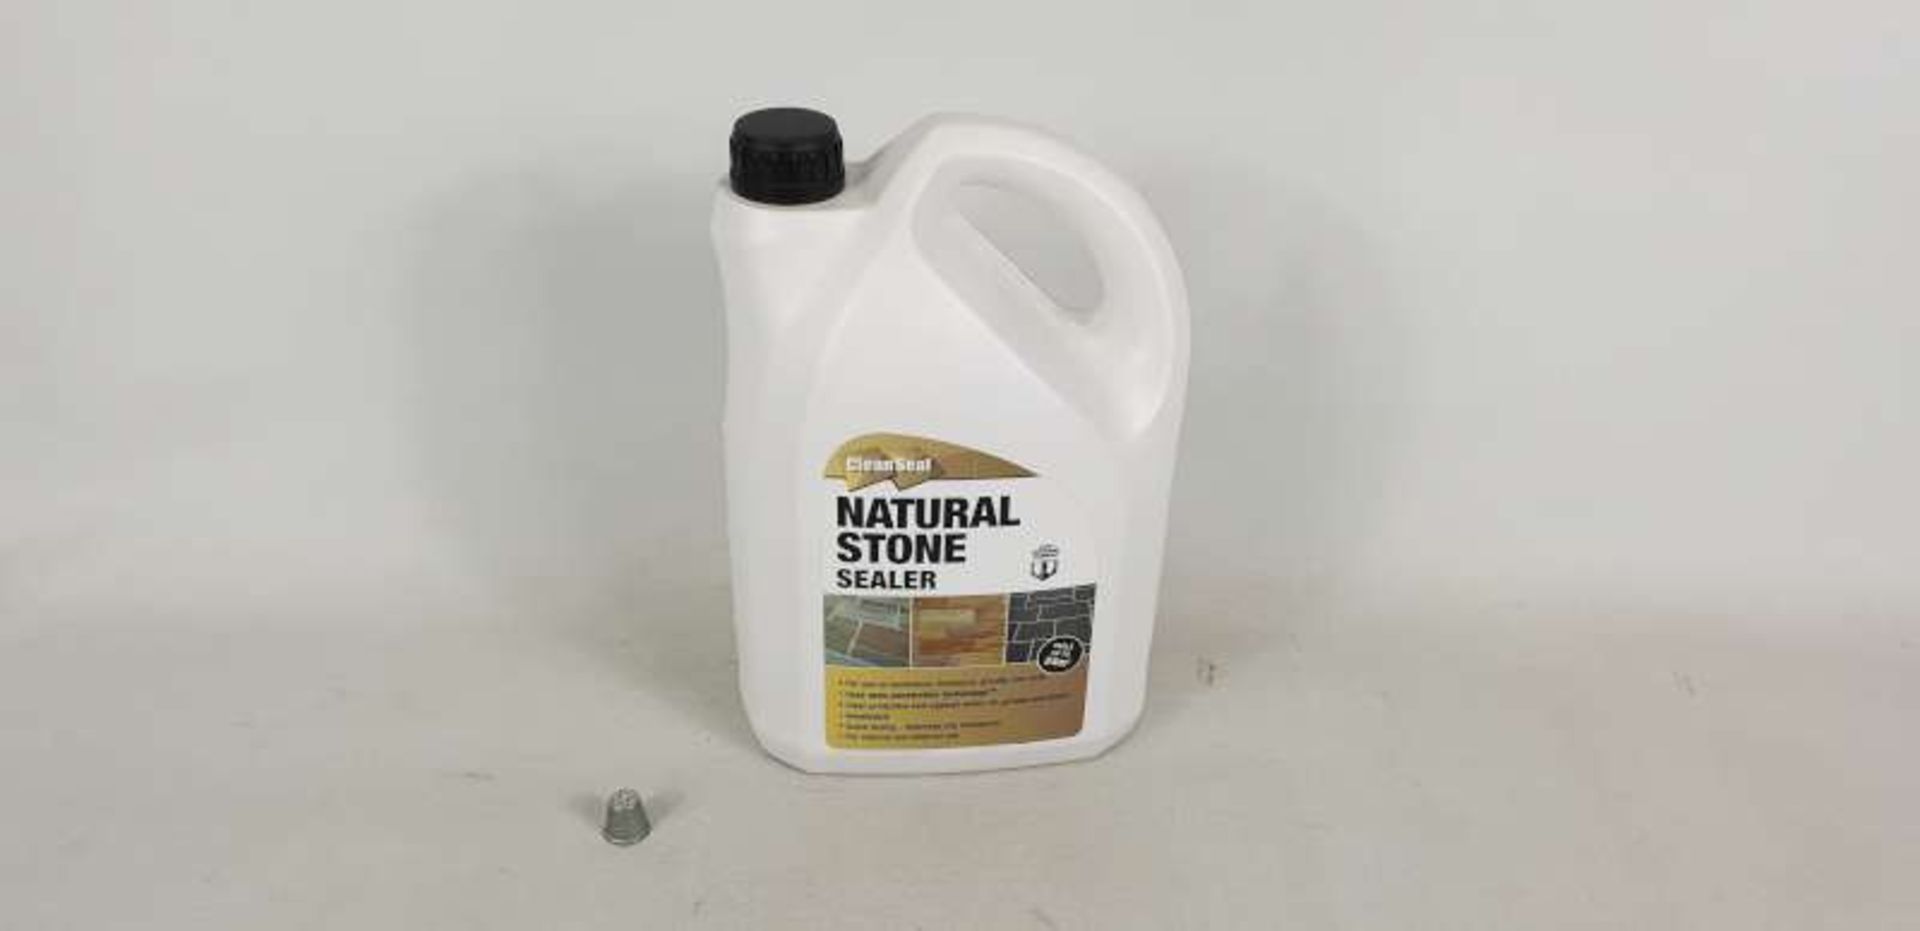 24 X 4 LITRE BOTTLES OF CLEAN SEAL NATURAL STONE SEALER IN 5 BOXES